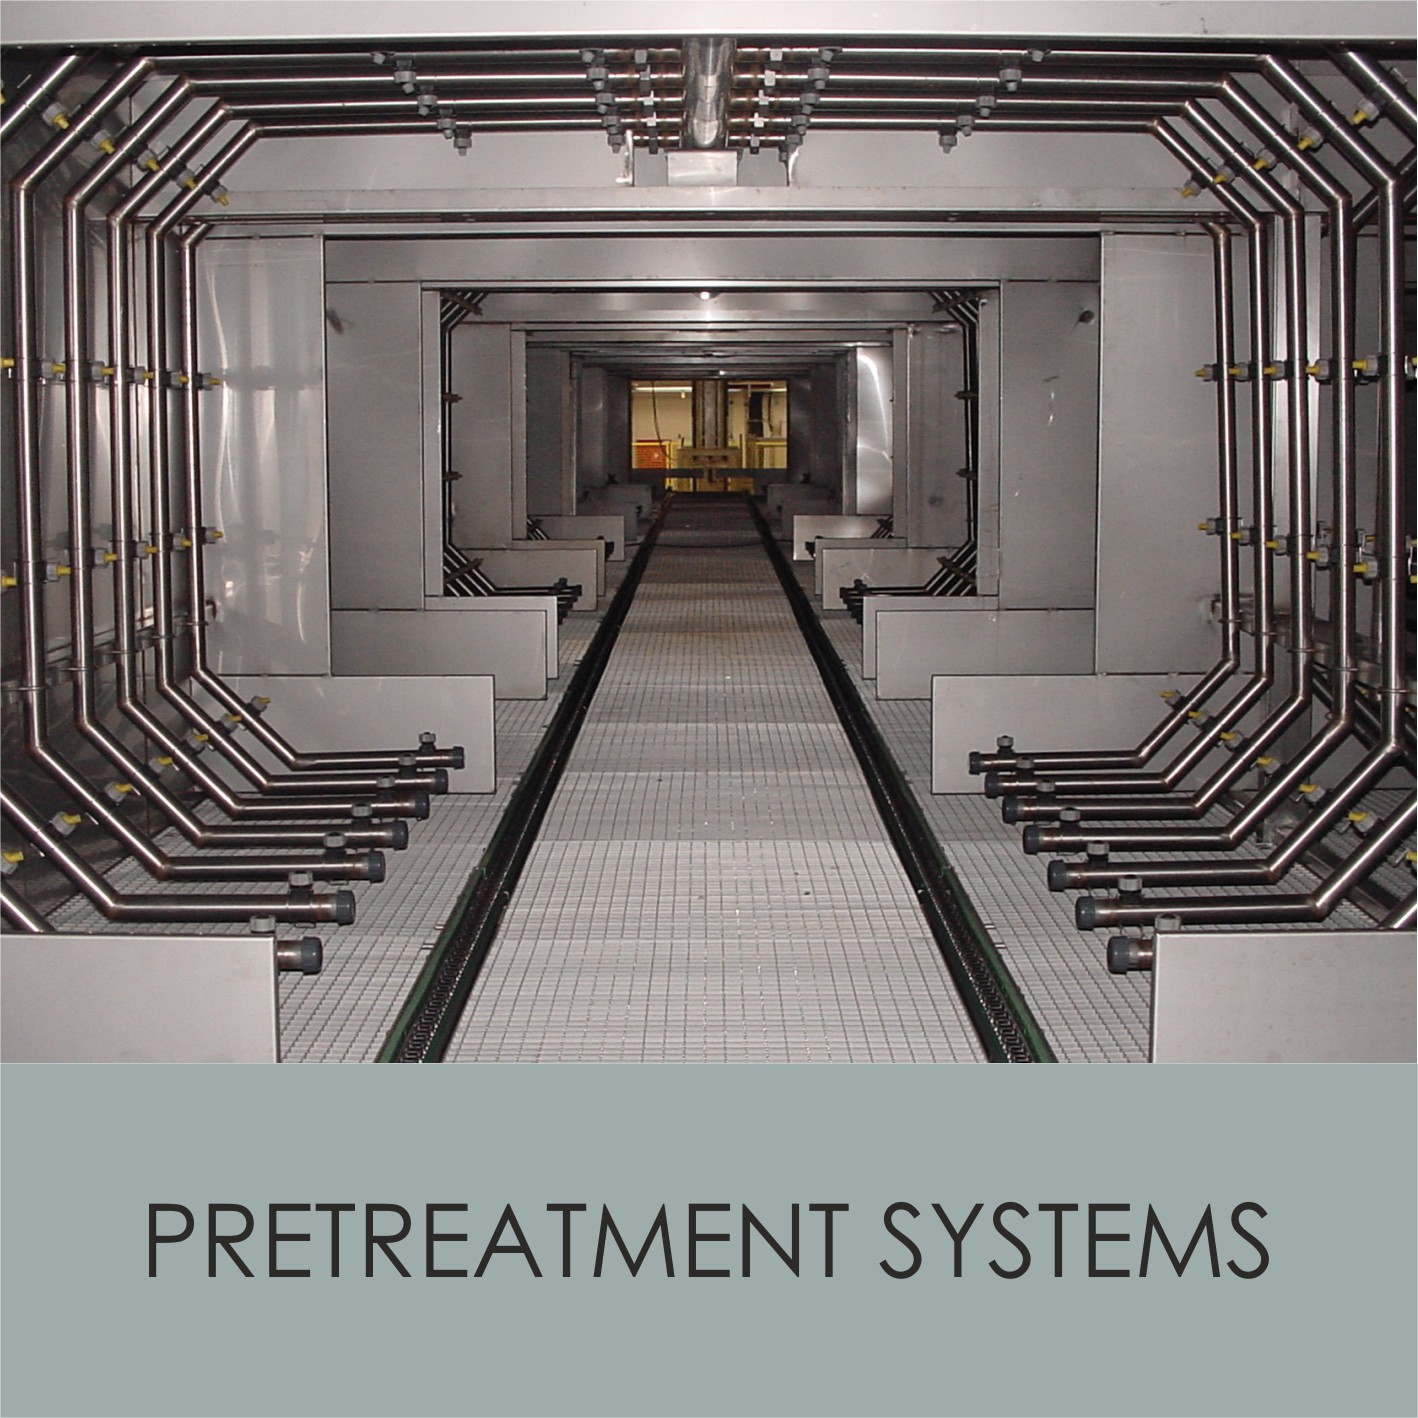 Preatreatment systems